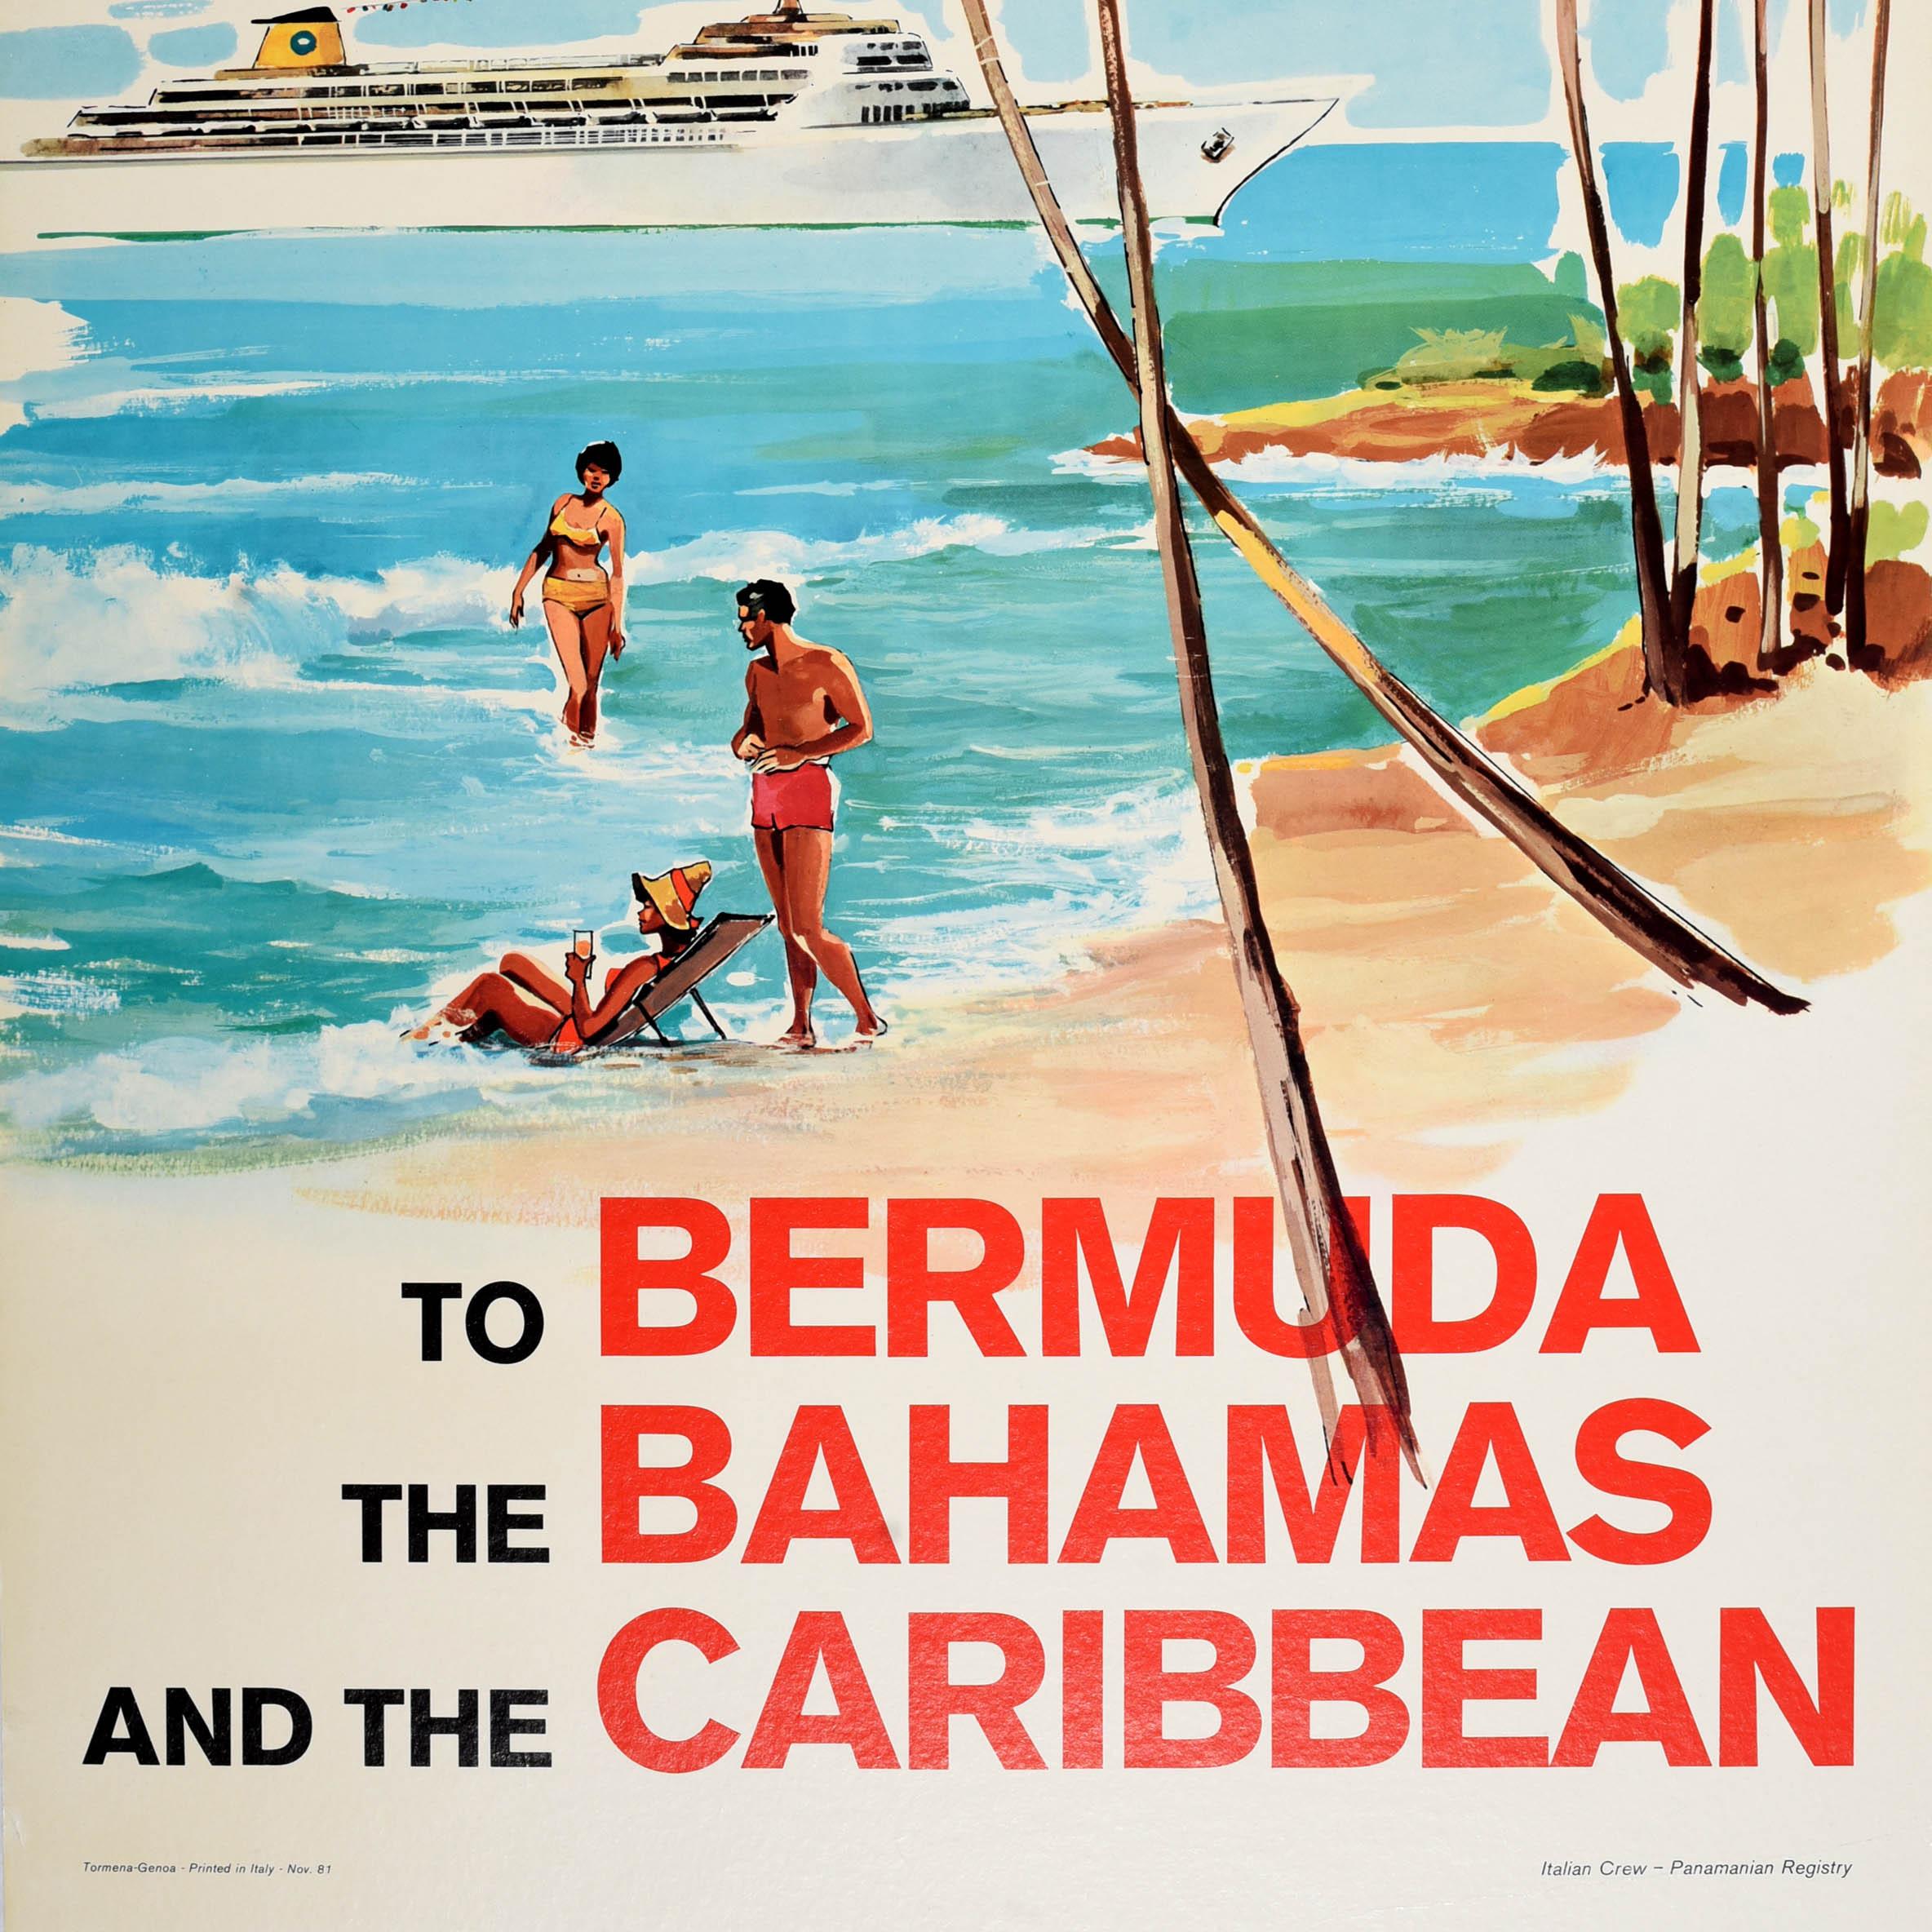 Original vintage travel poster - Home Lines Cruise with S.S. Oceanic to the Bahamas Bermuda and the Caribbean - featuring a great image depicting passengers from a cruise holiday relaxing on a sandy beach below palm trees with a lady in a sun hat